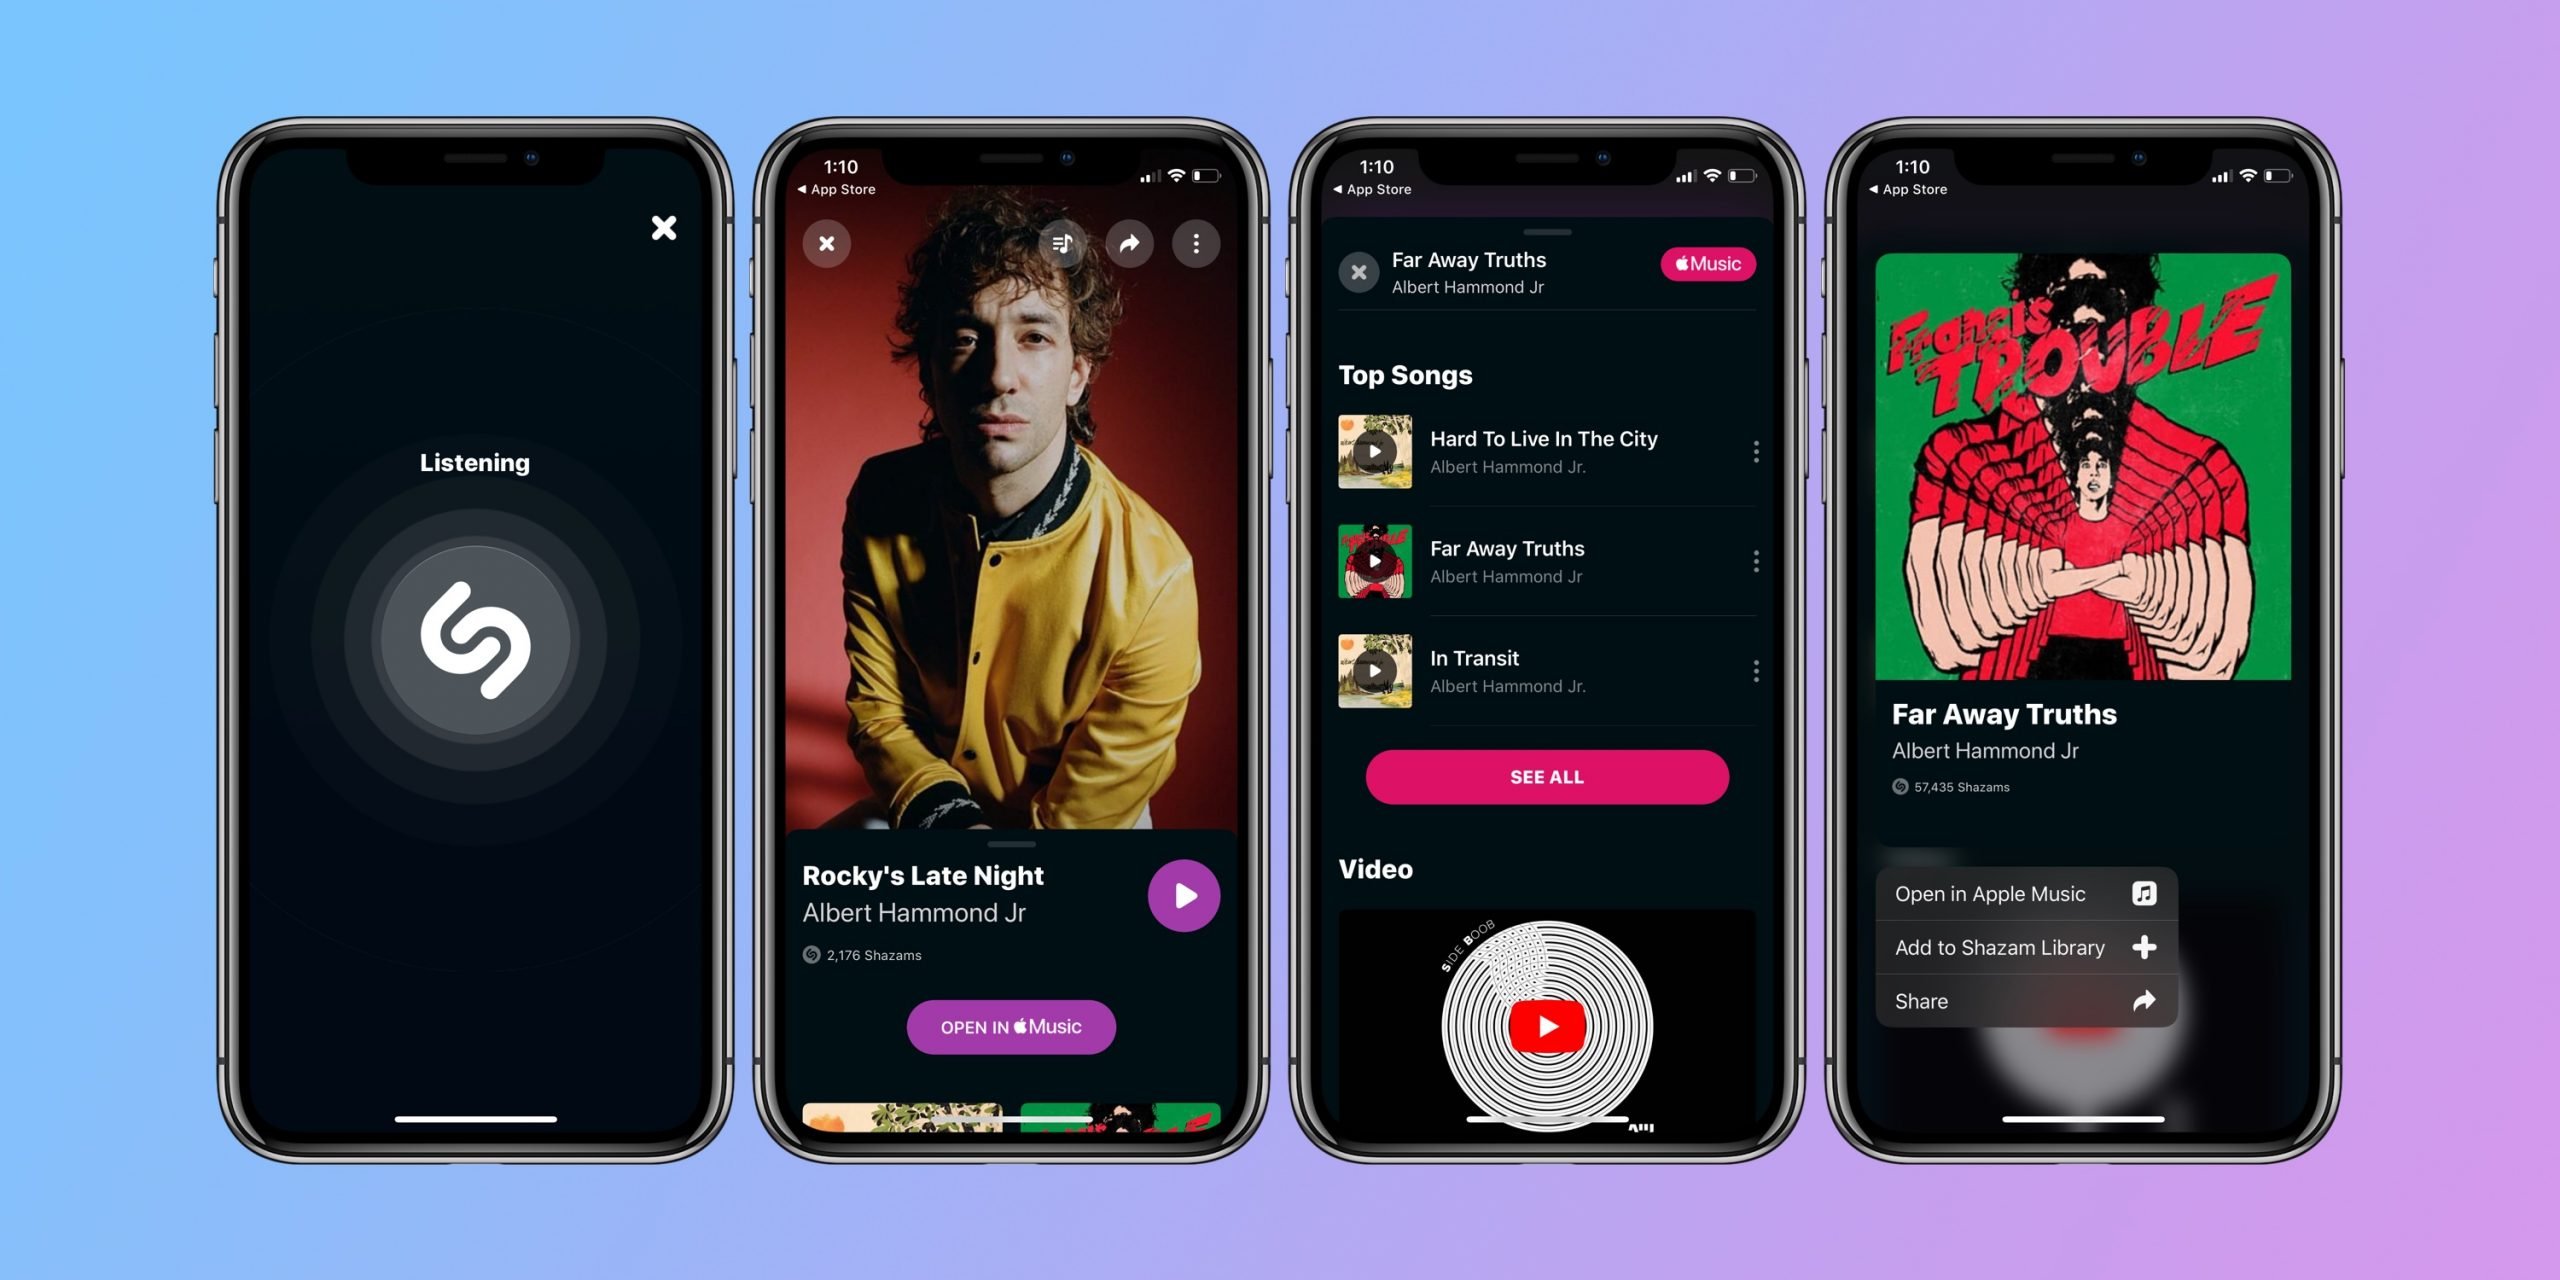 Shazam app updated with Dark Mode support for iOS 13